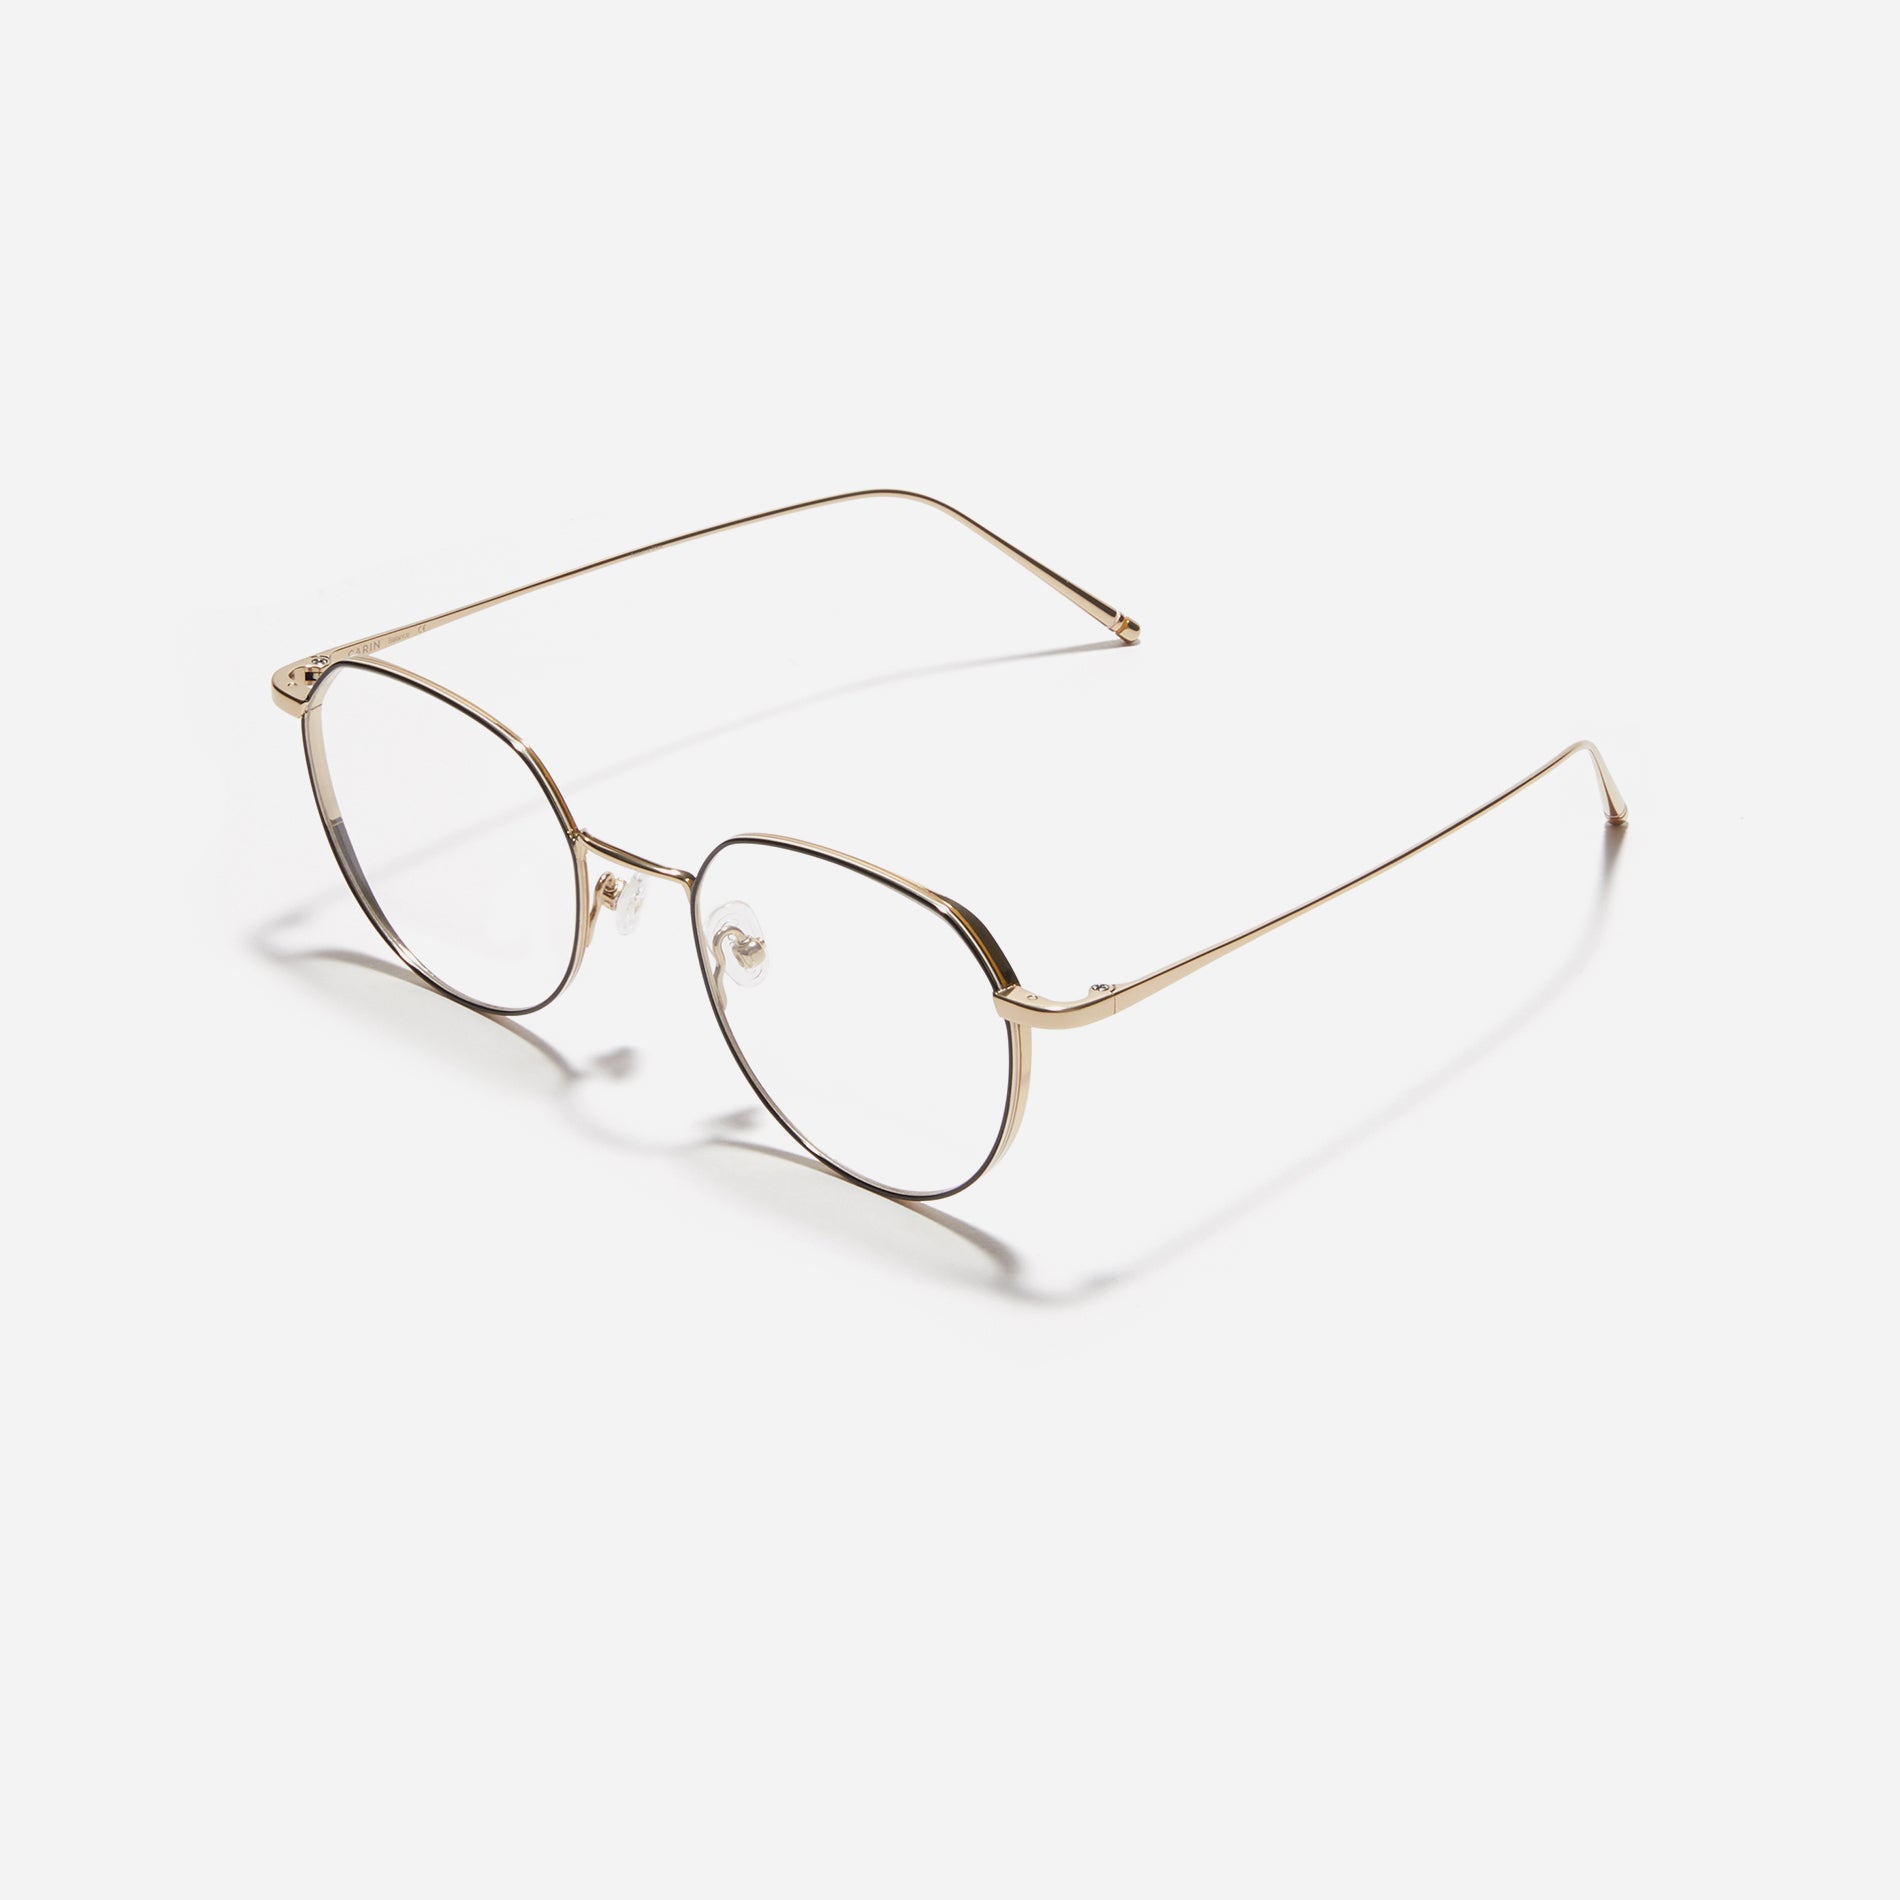 Gus P are polygonal-shaped, full-metal eyeglasses with a dual-rim structure designed to accommodate thicker, high-prescription lenses. Both the frame and temples are made of pure titanium, ensuring a lightweight and comfortable fit.